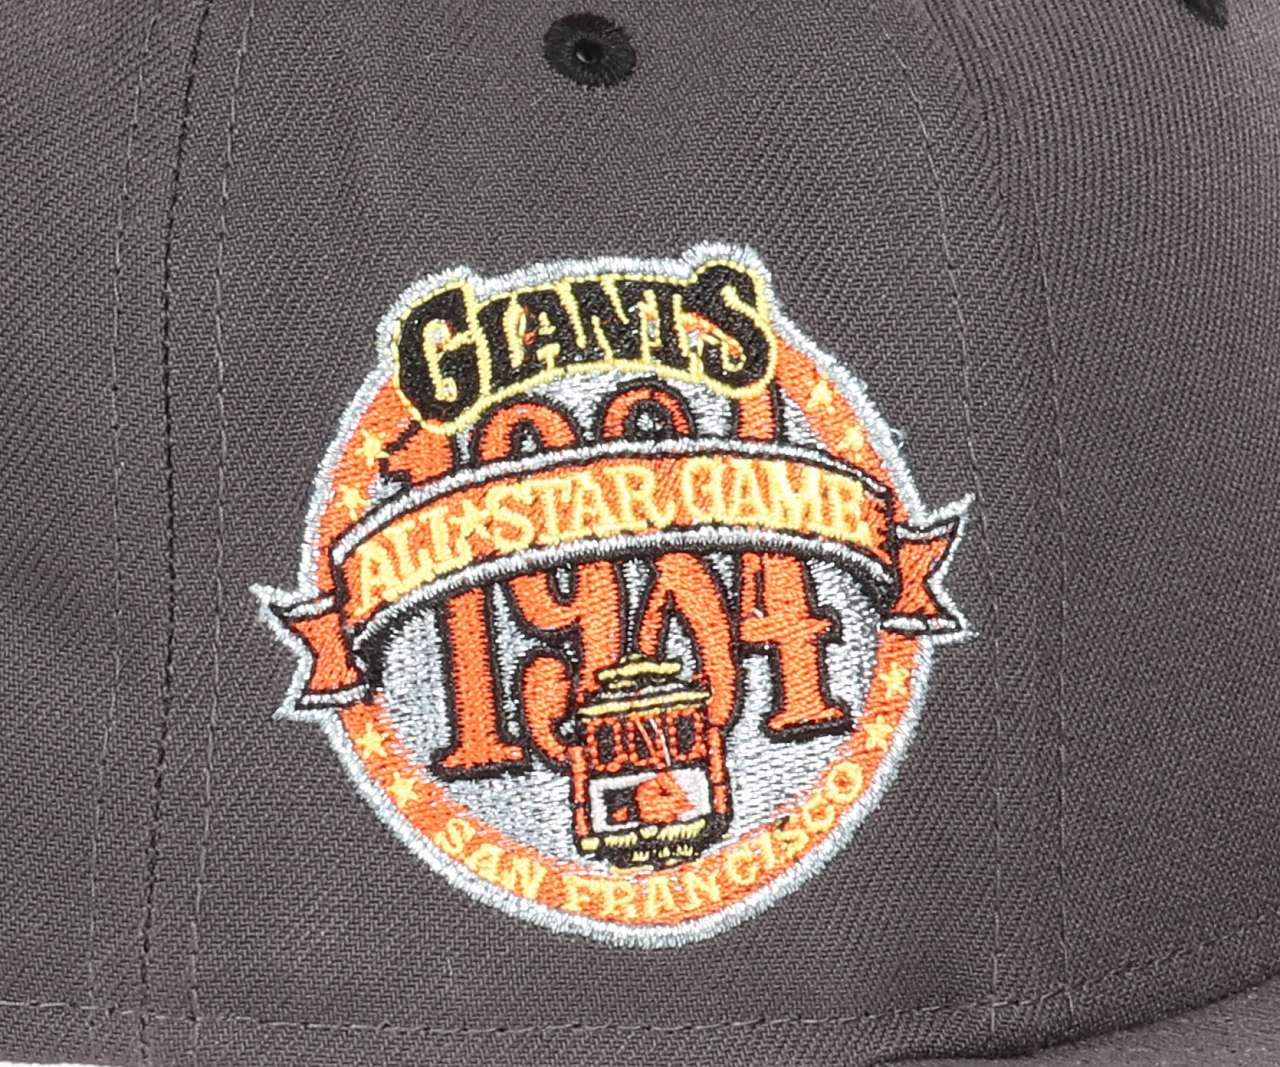 San Francisco Giants MLB All-Star Game 1984 Sidepatch Gray 59Fifty Basecap New Era